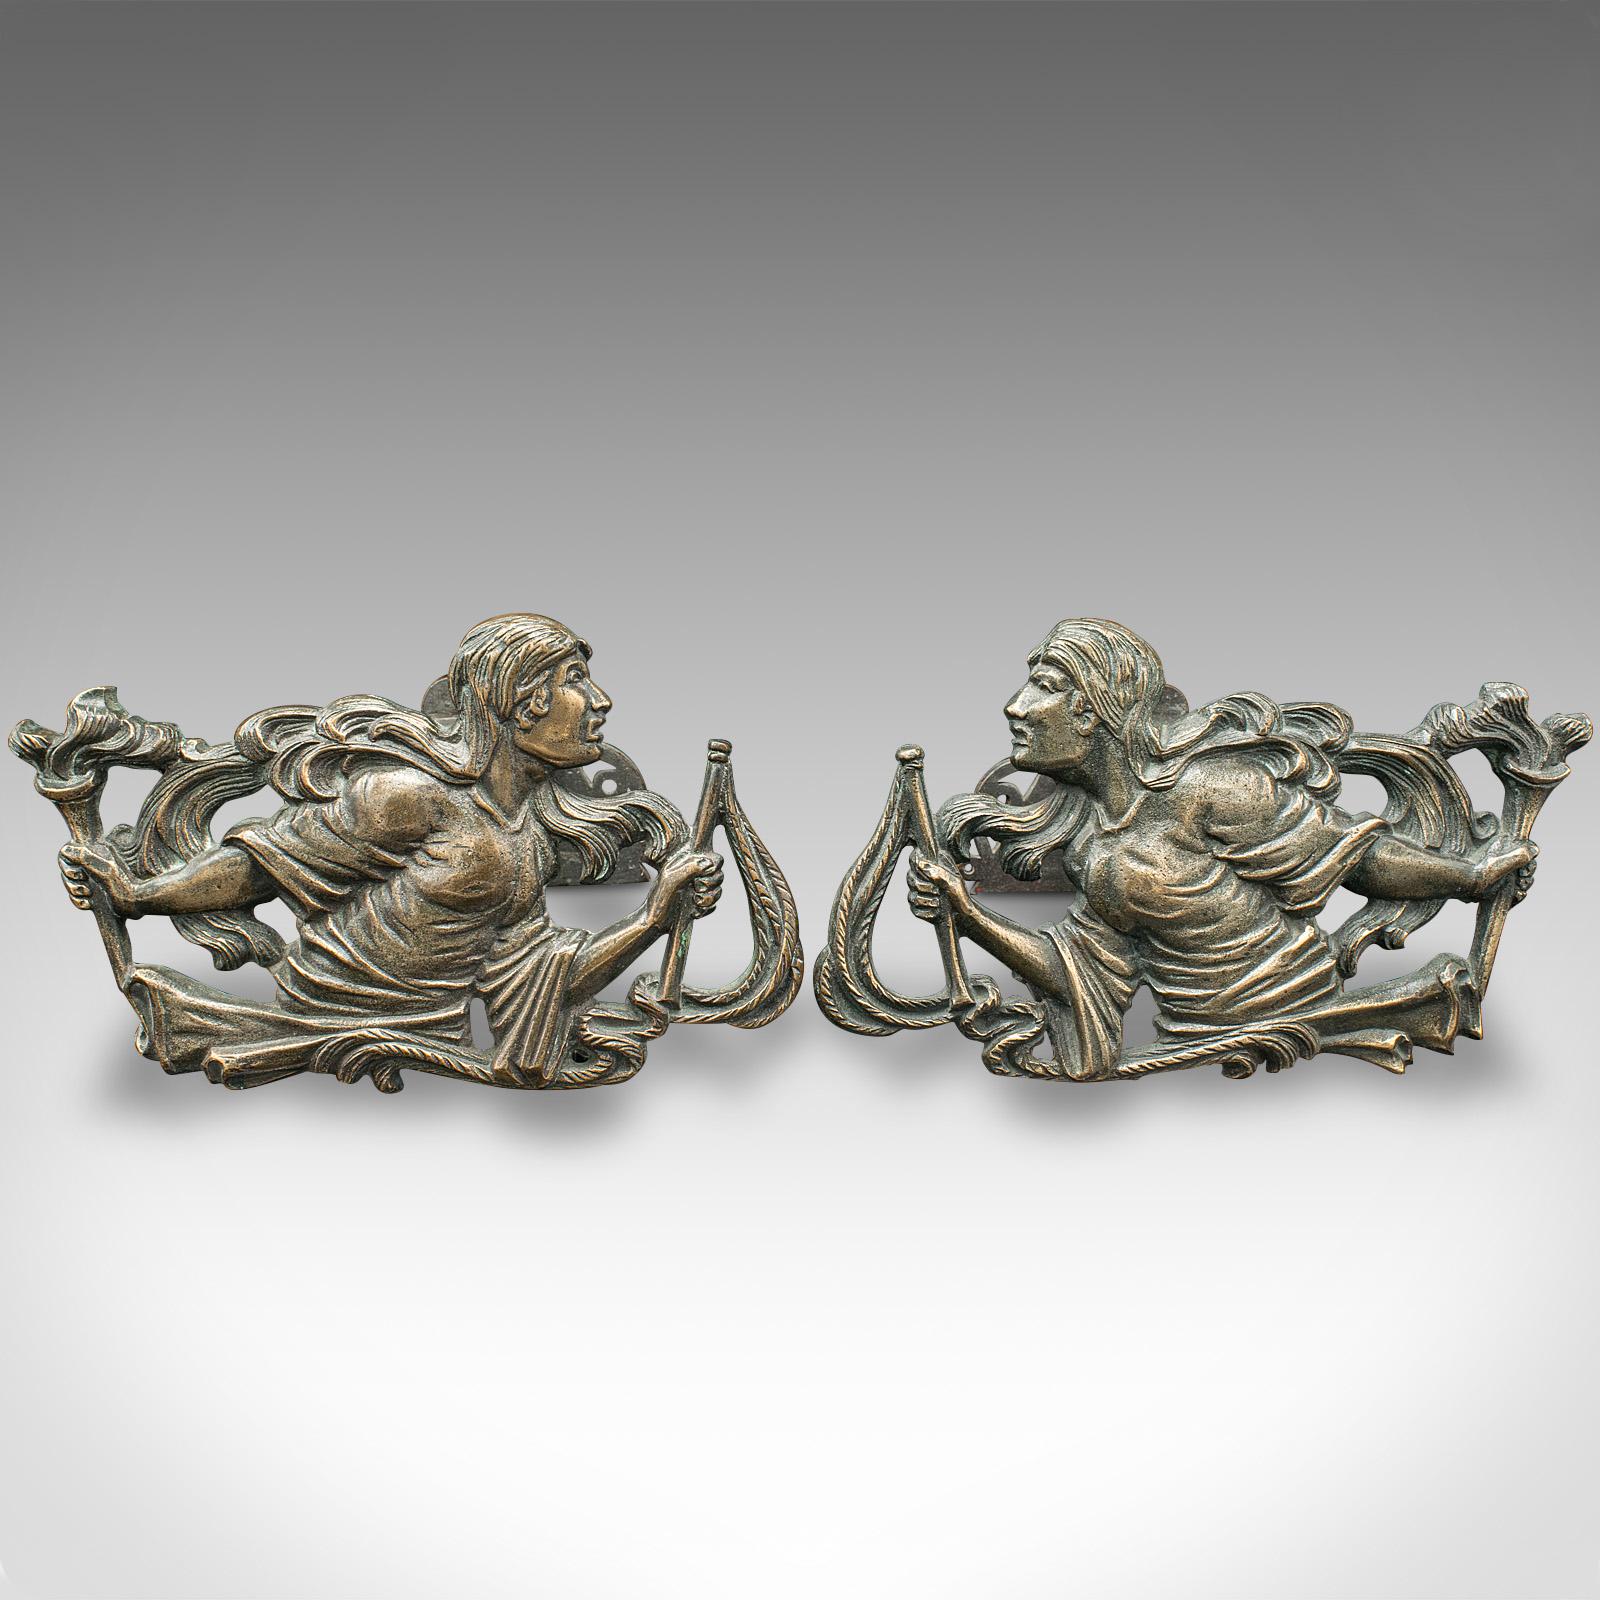 This is a pair of antique figural andirons. A French, bronze decorative fireside tool rest with female form in country house taste, dating to the late Victorian period, circa 1850.

Strikingly decorative fireside interest with fine